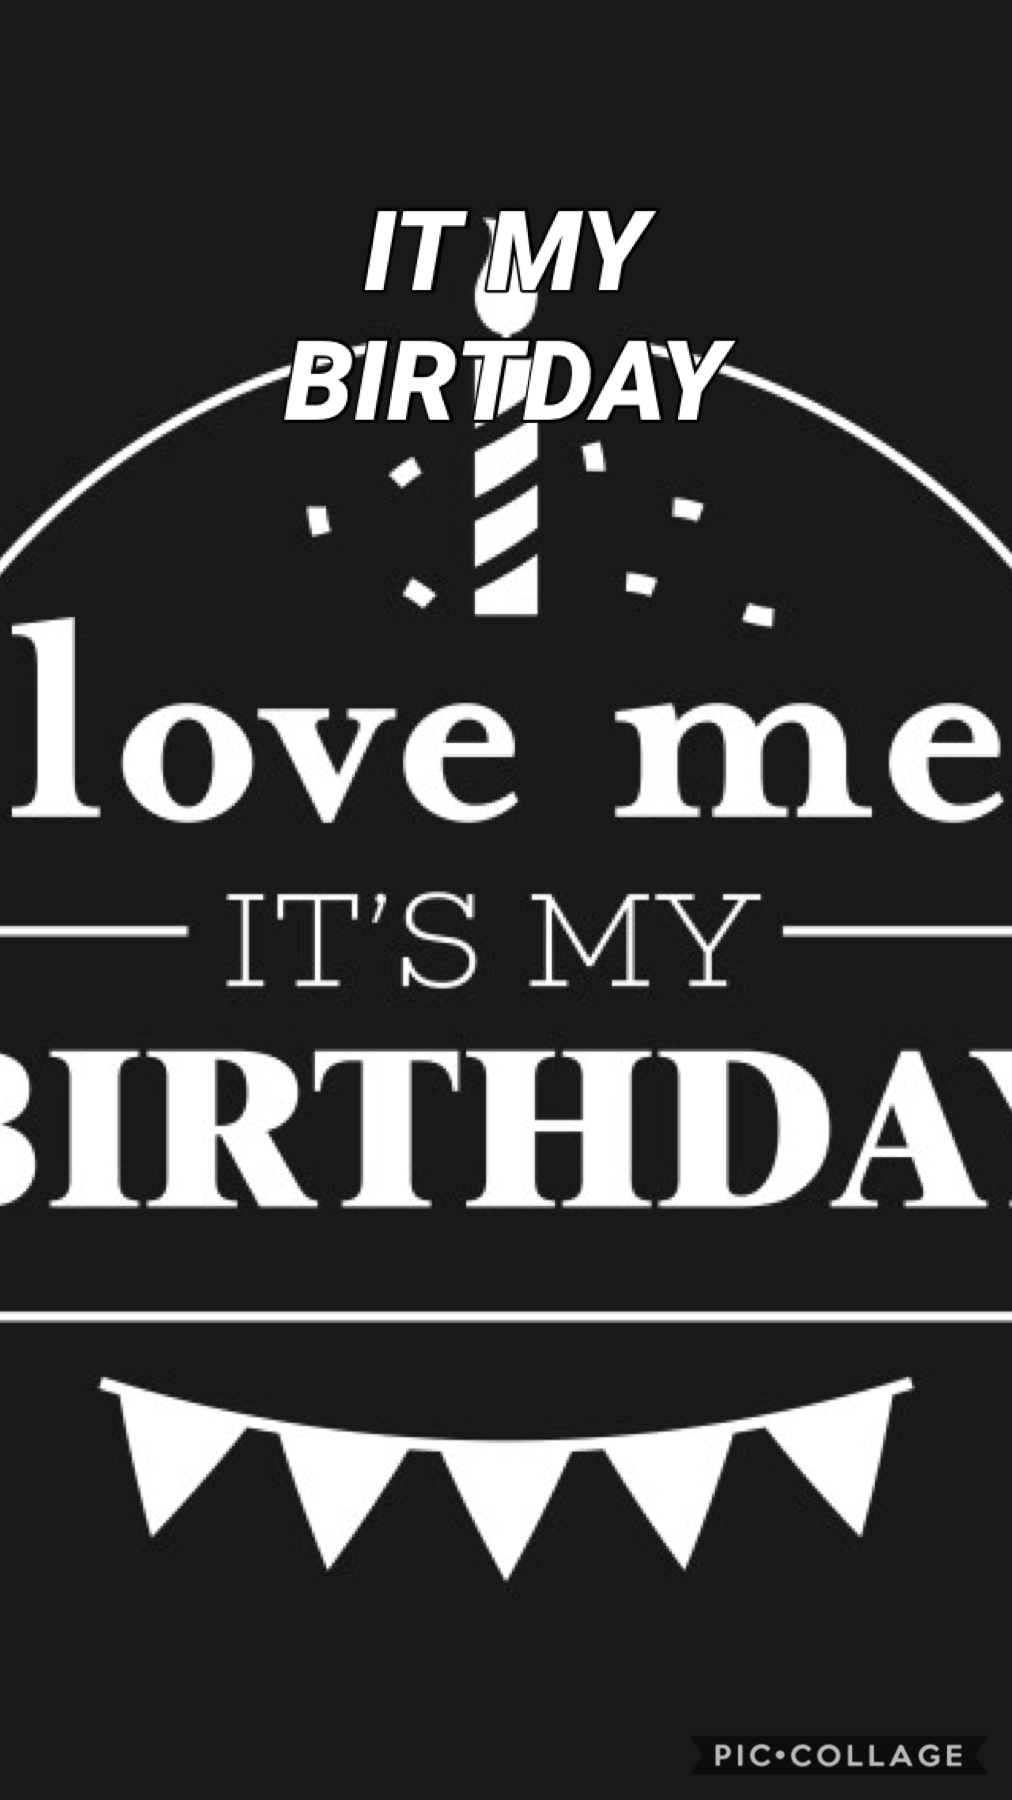 IT MY BIRTDAY